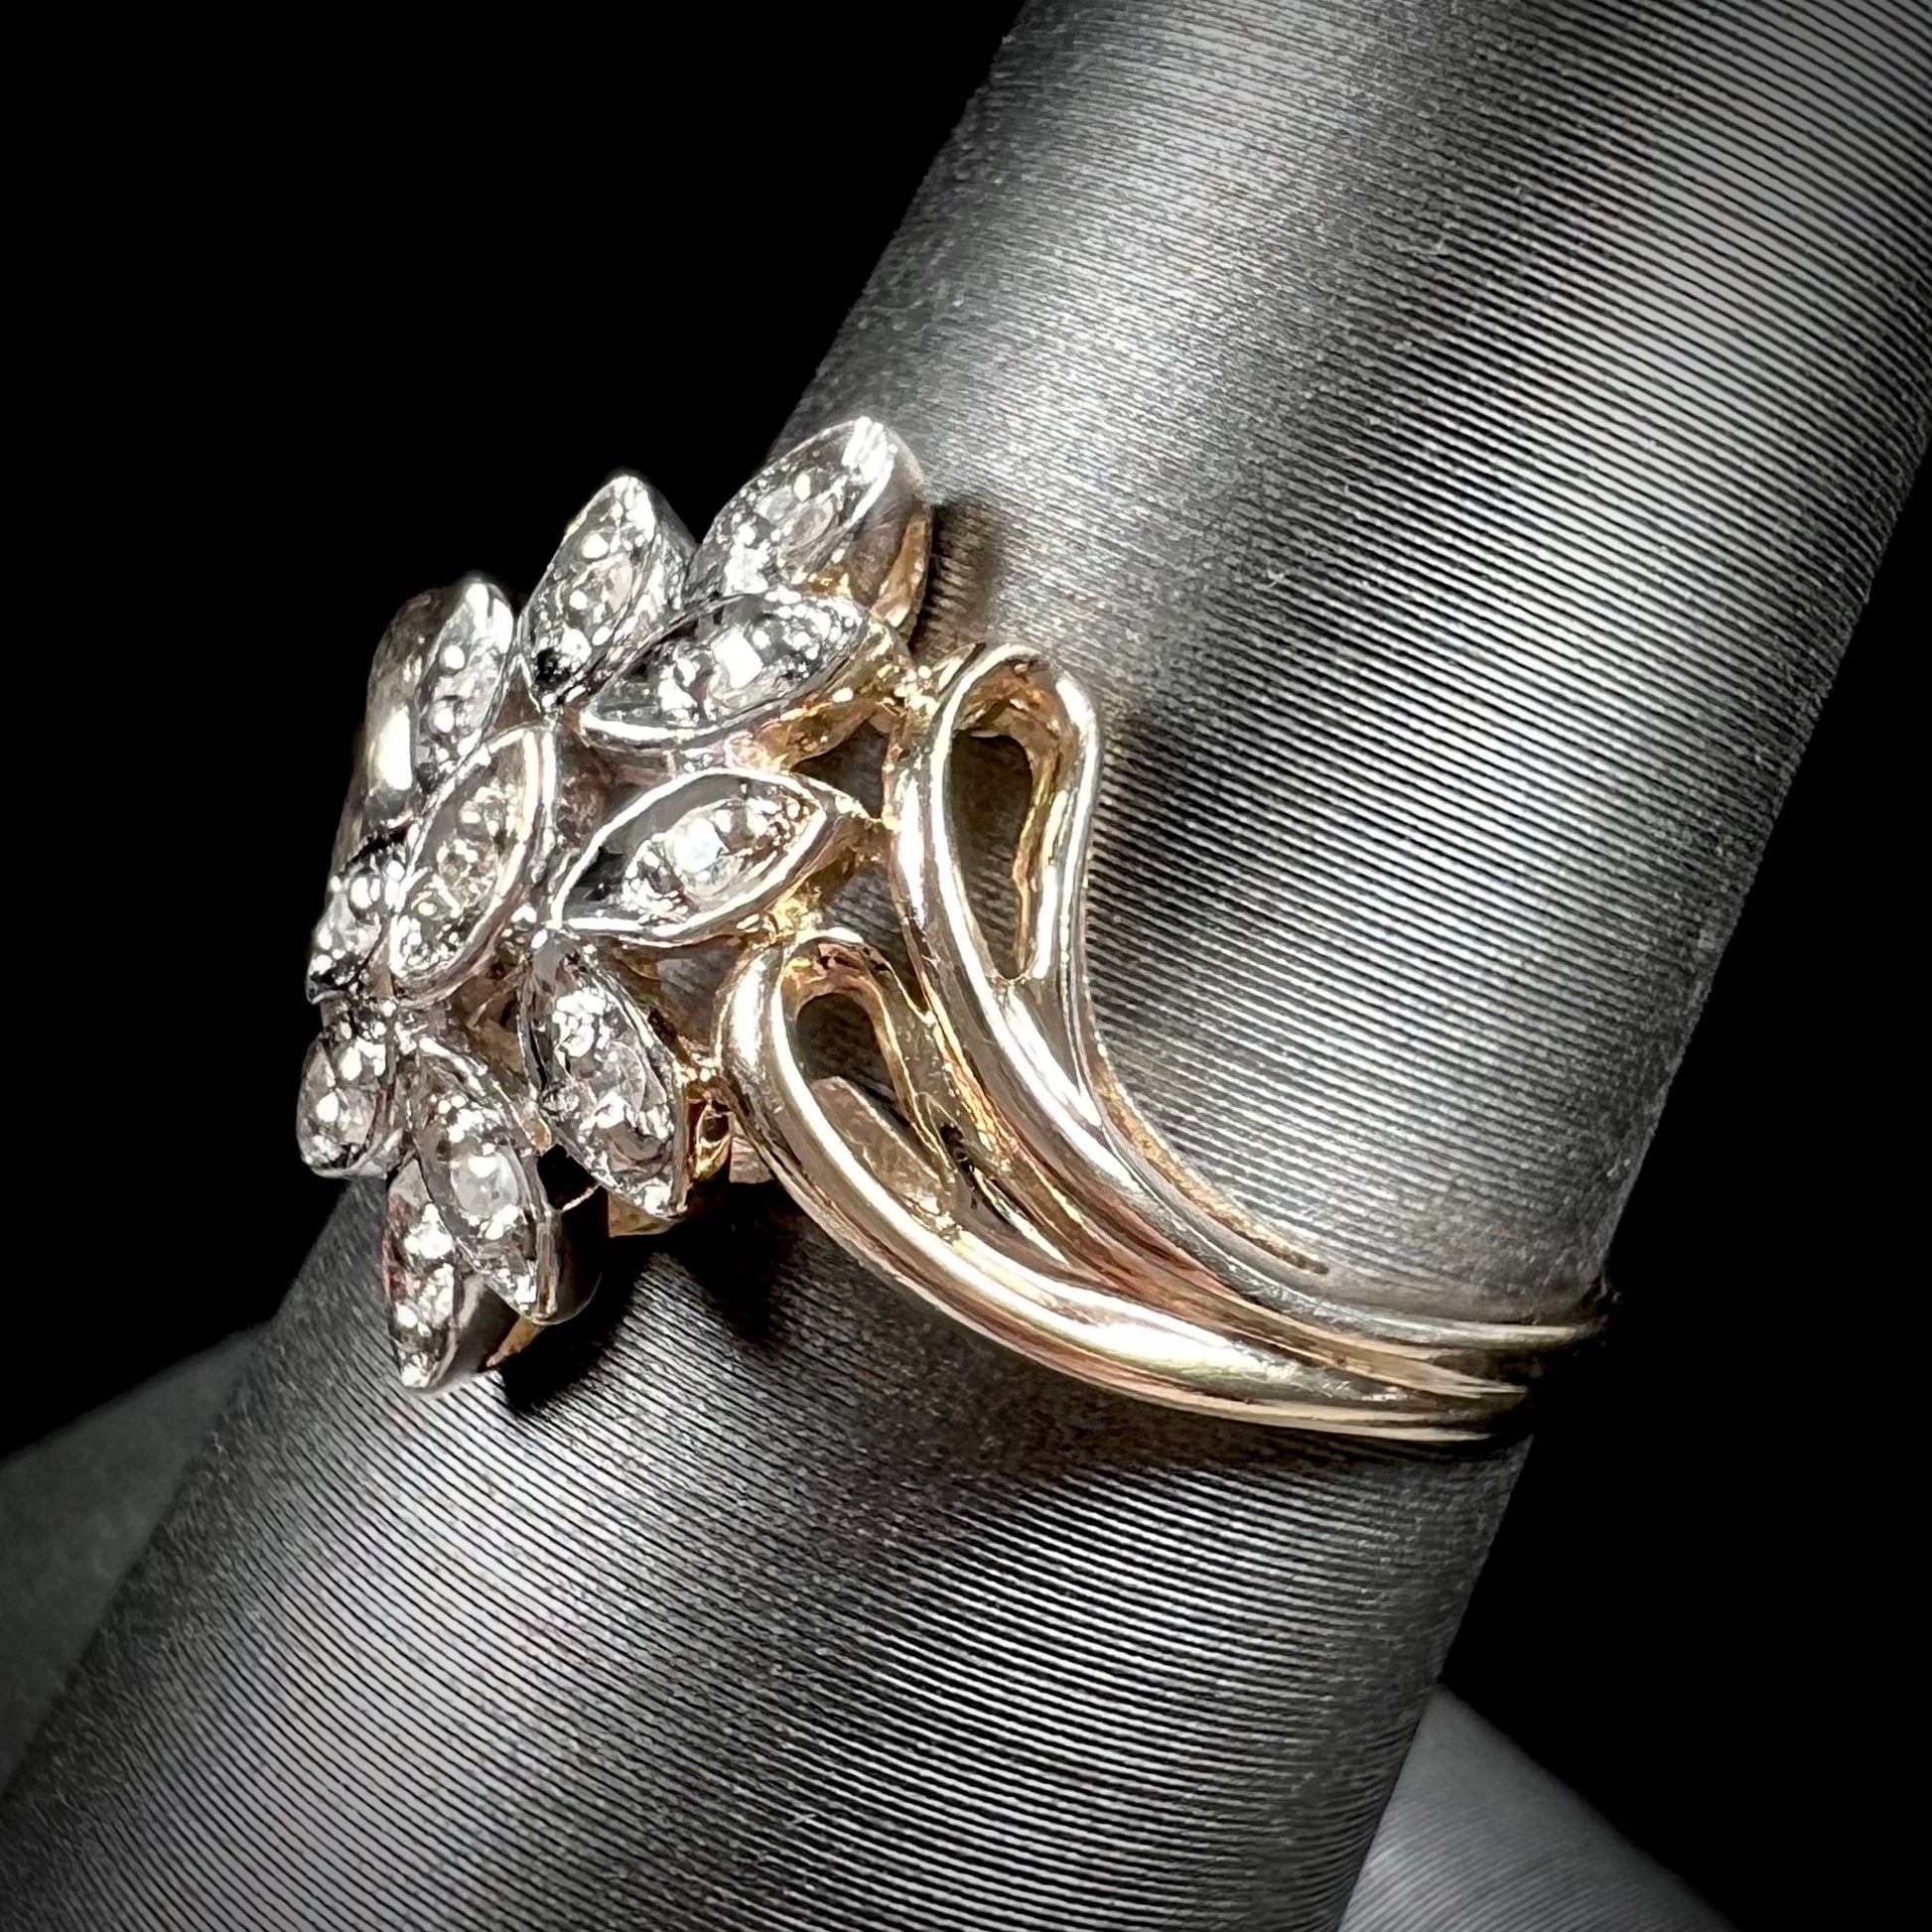 A ladies' vintage style gold diamond cluster ring.